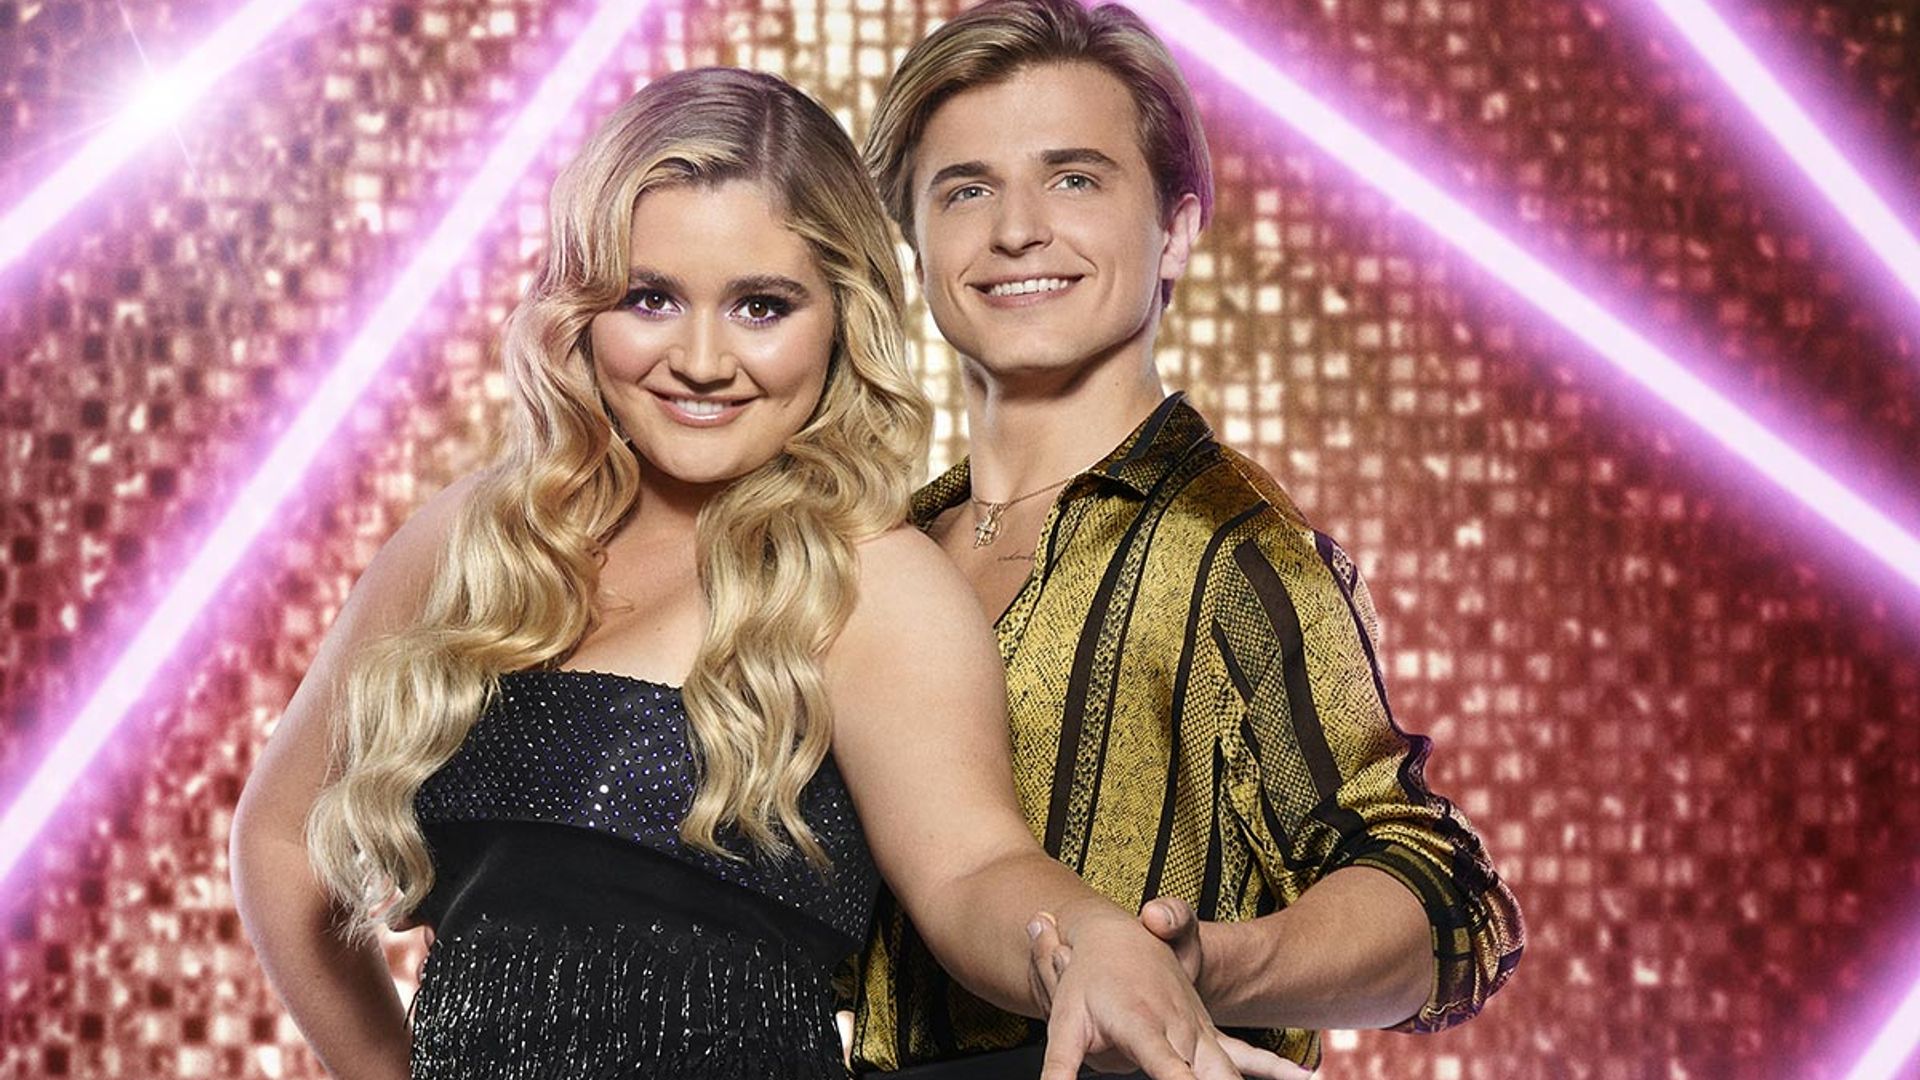 Strictly's Tilly Ramsay shares surprising backstage video after partner Nikita Kuzmin drops out